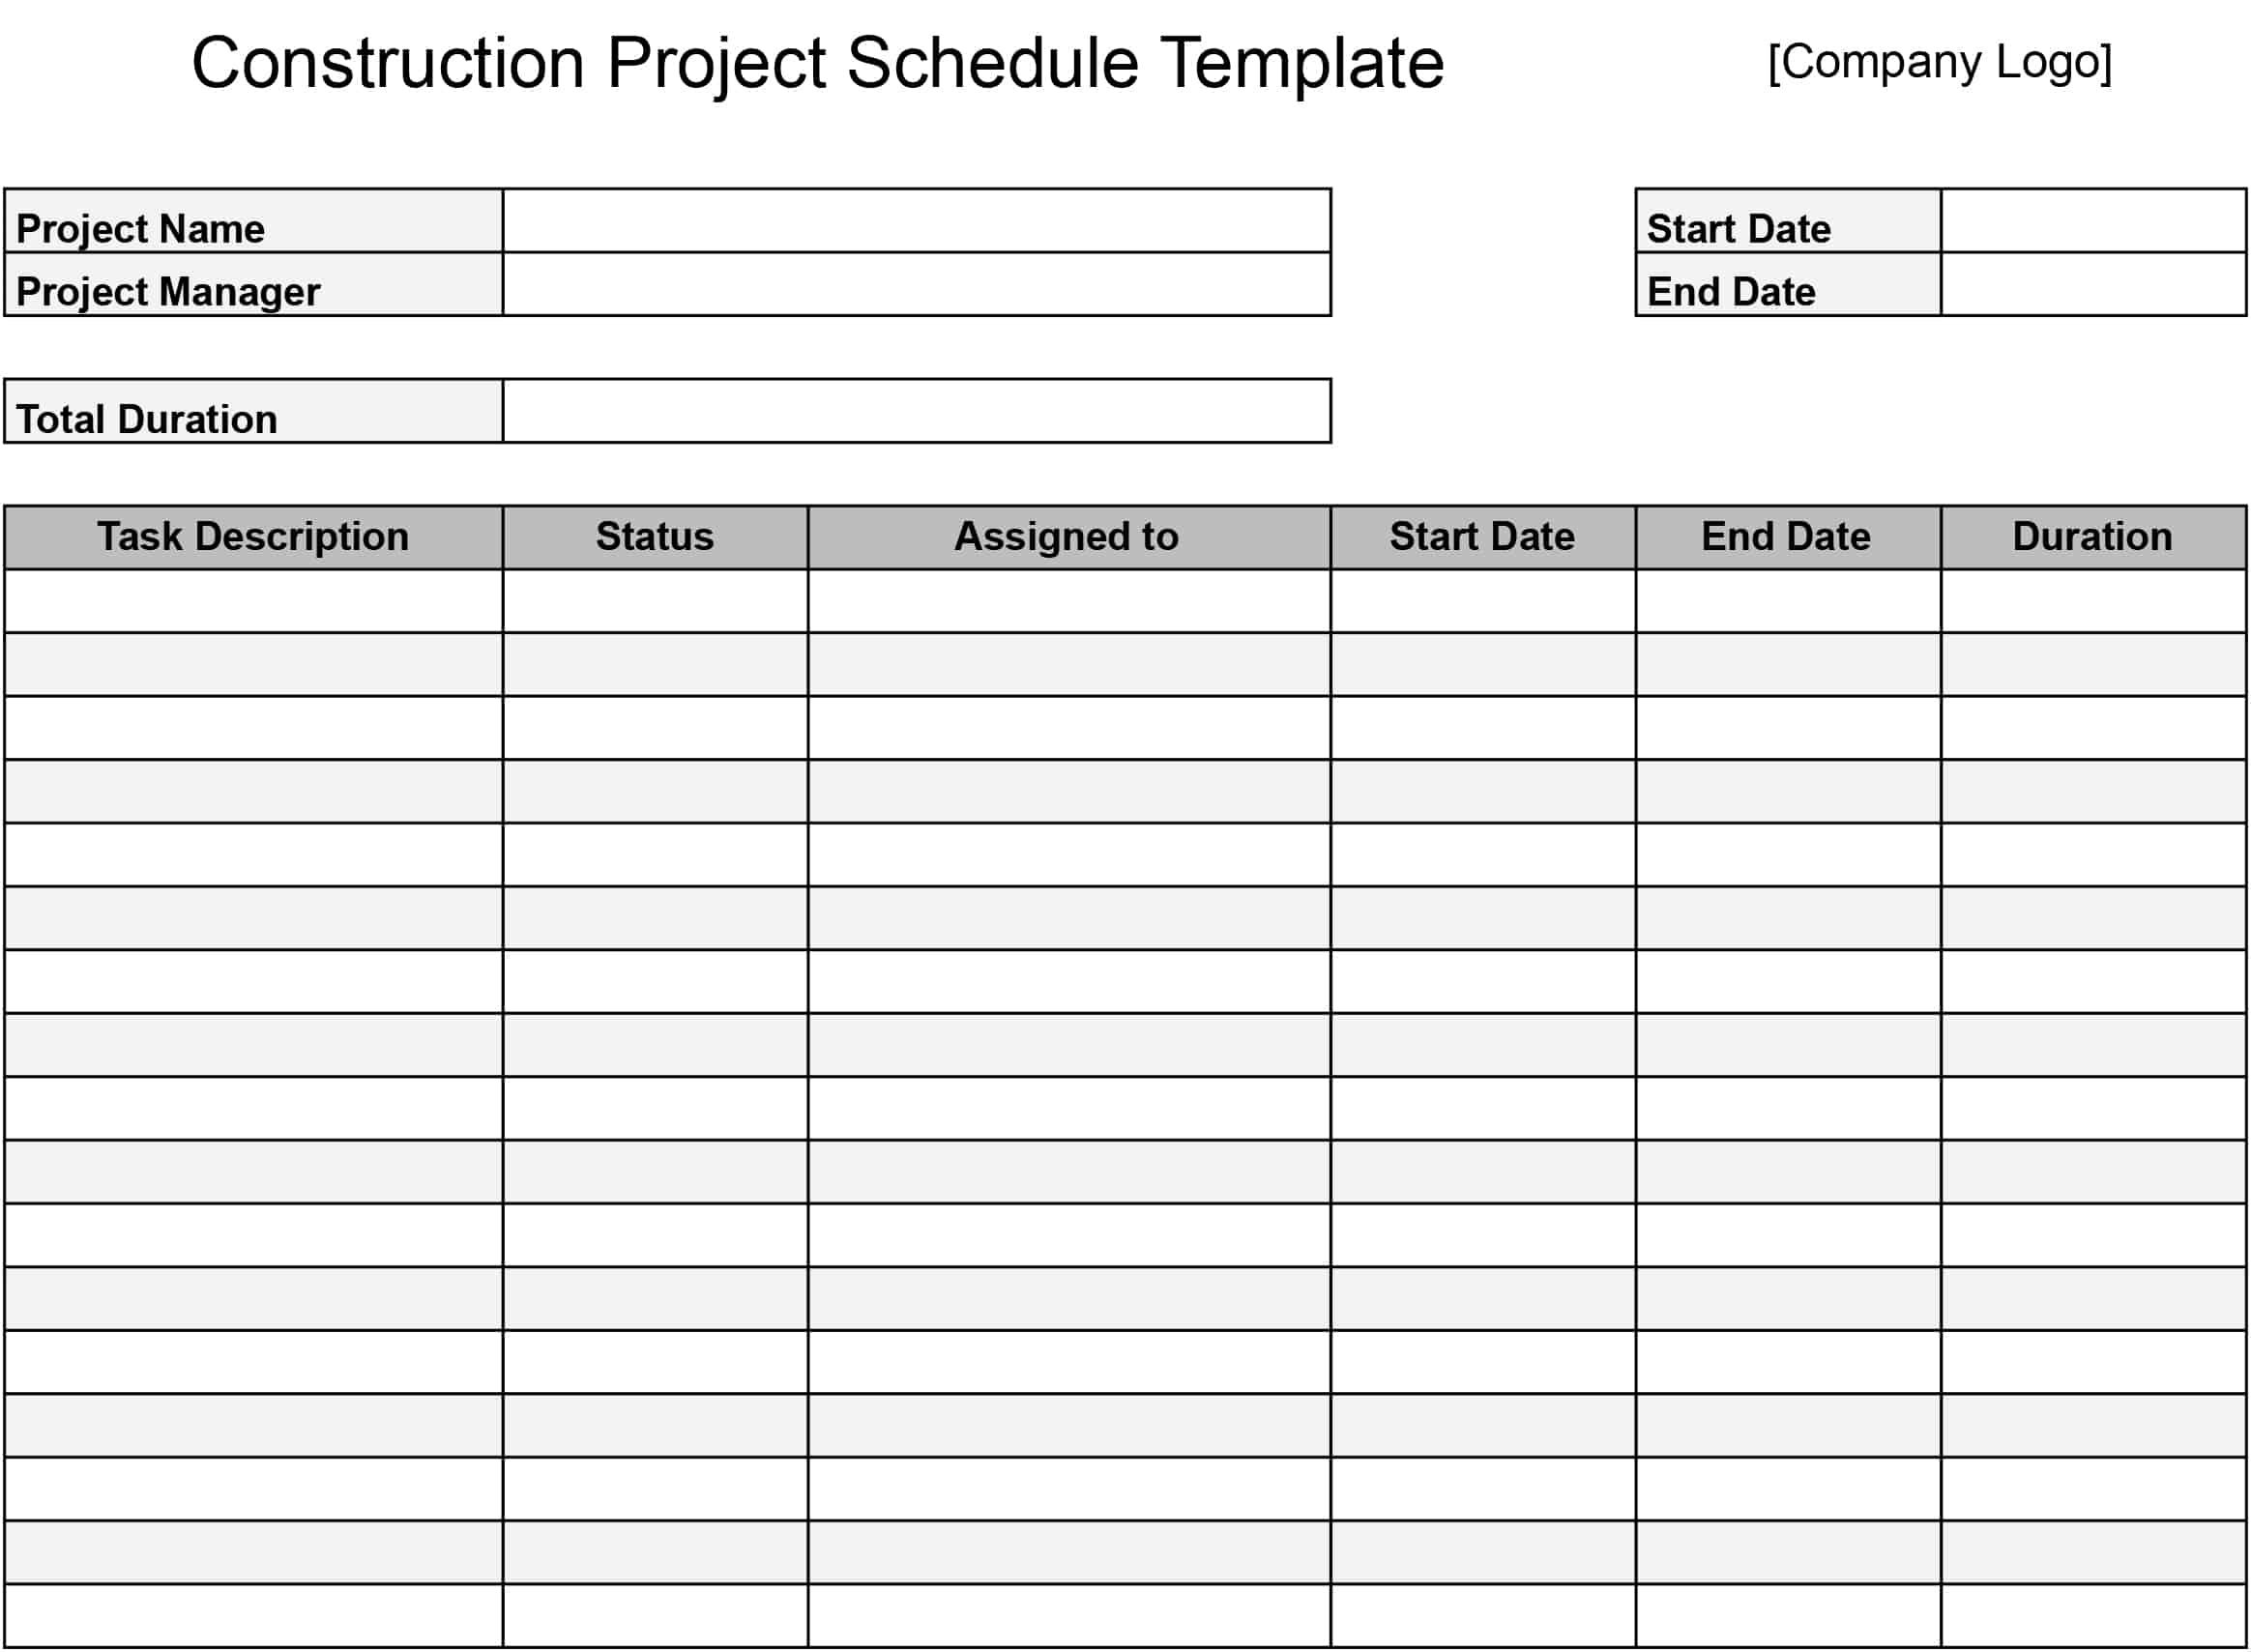 construction-schedule-templates-download-print-for-free